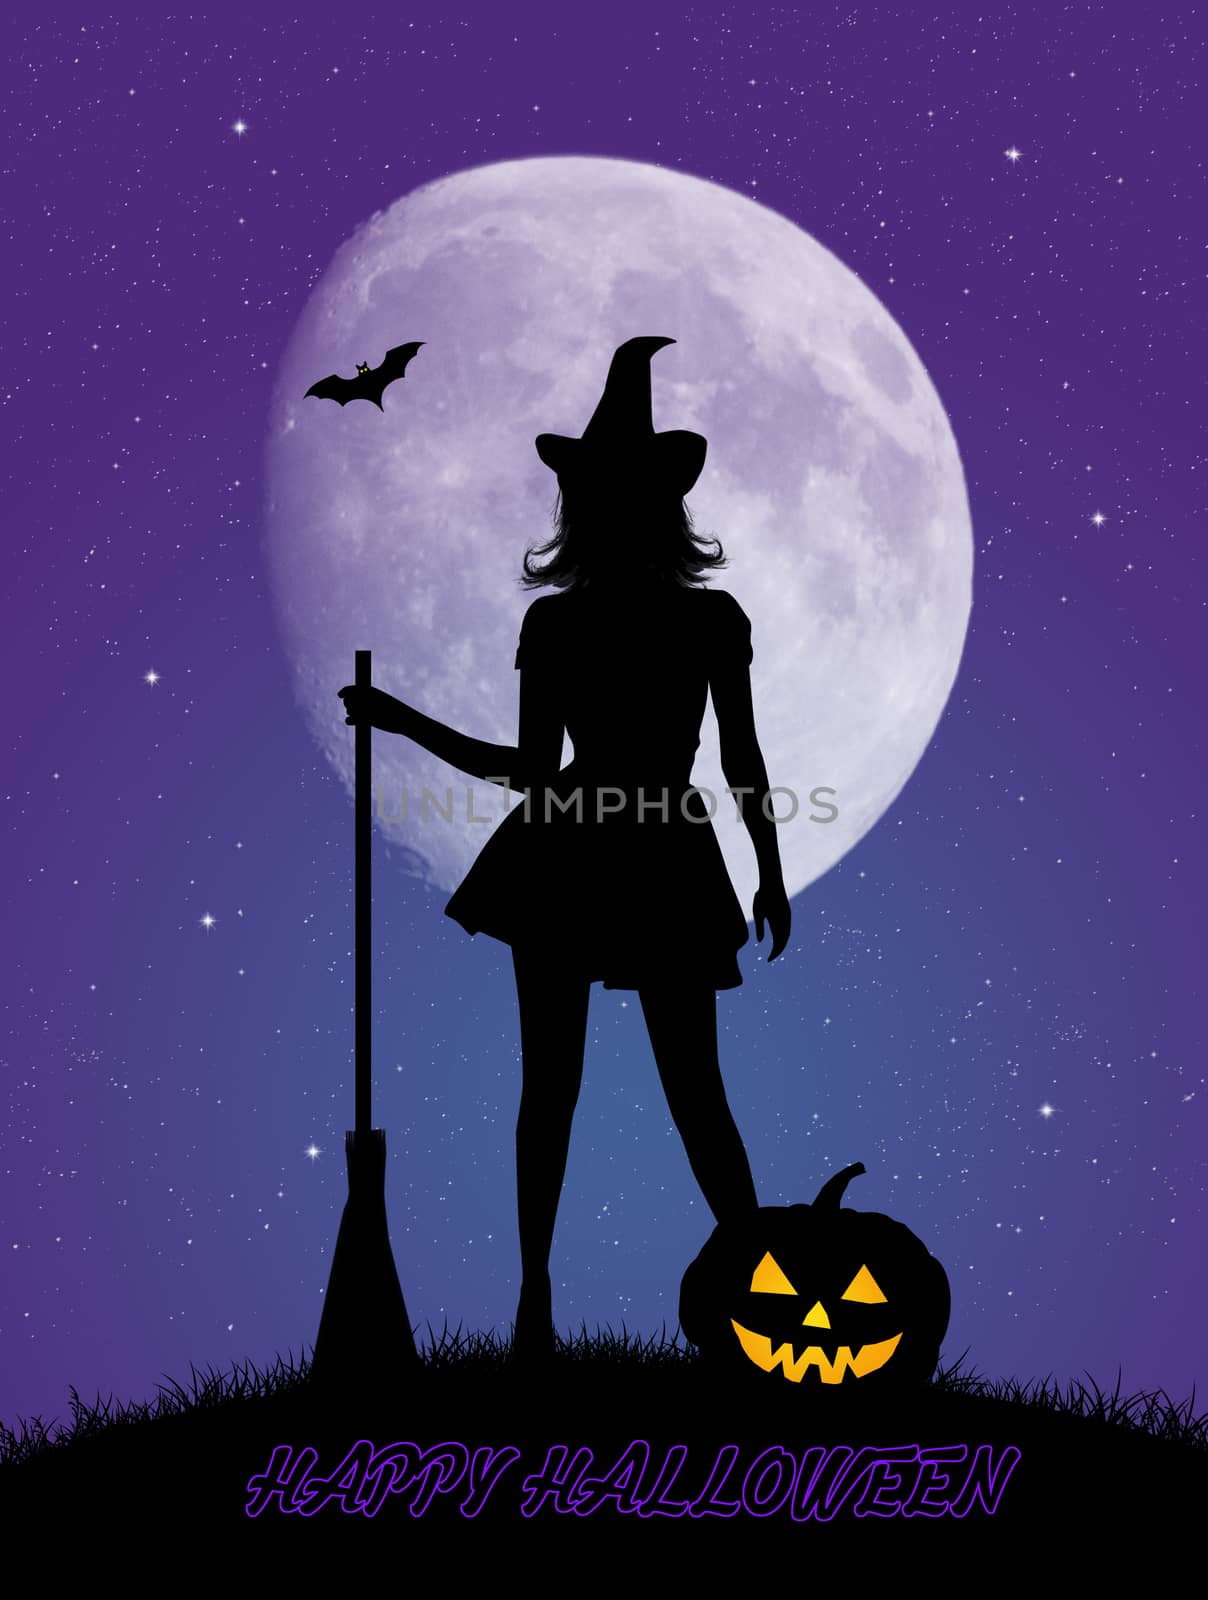 Halloween postcard with witch in the moonlight by adrenalina